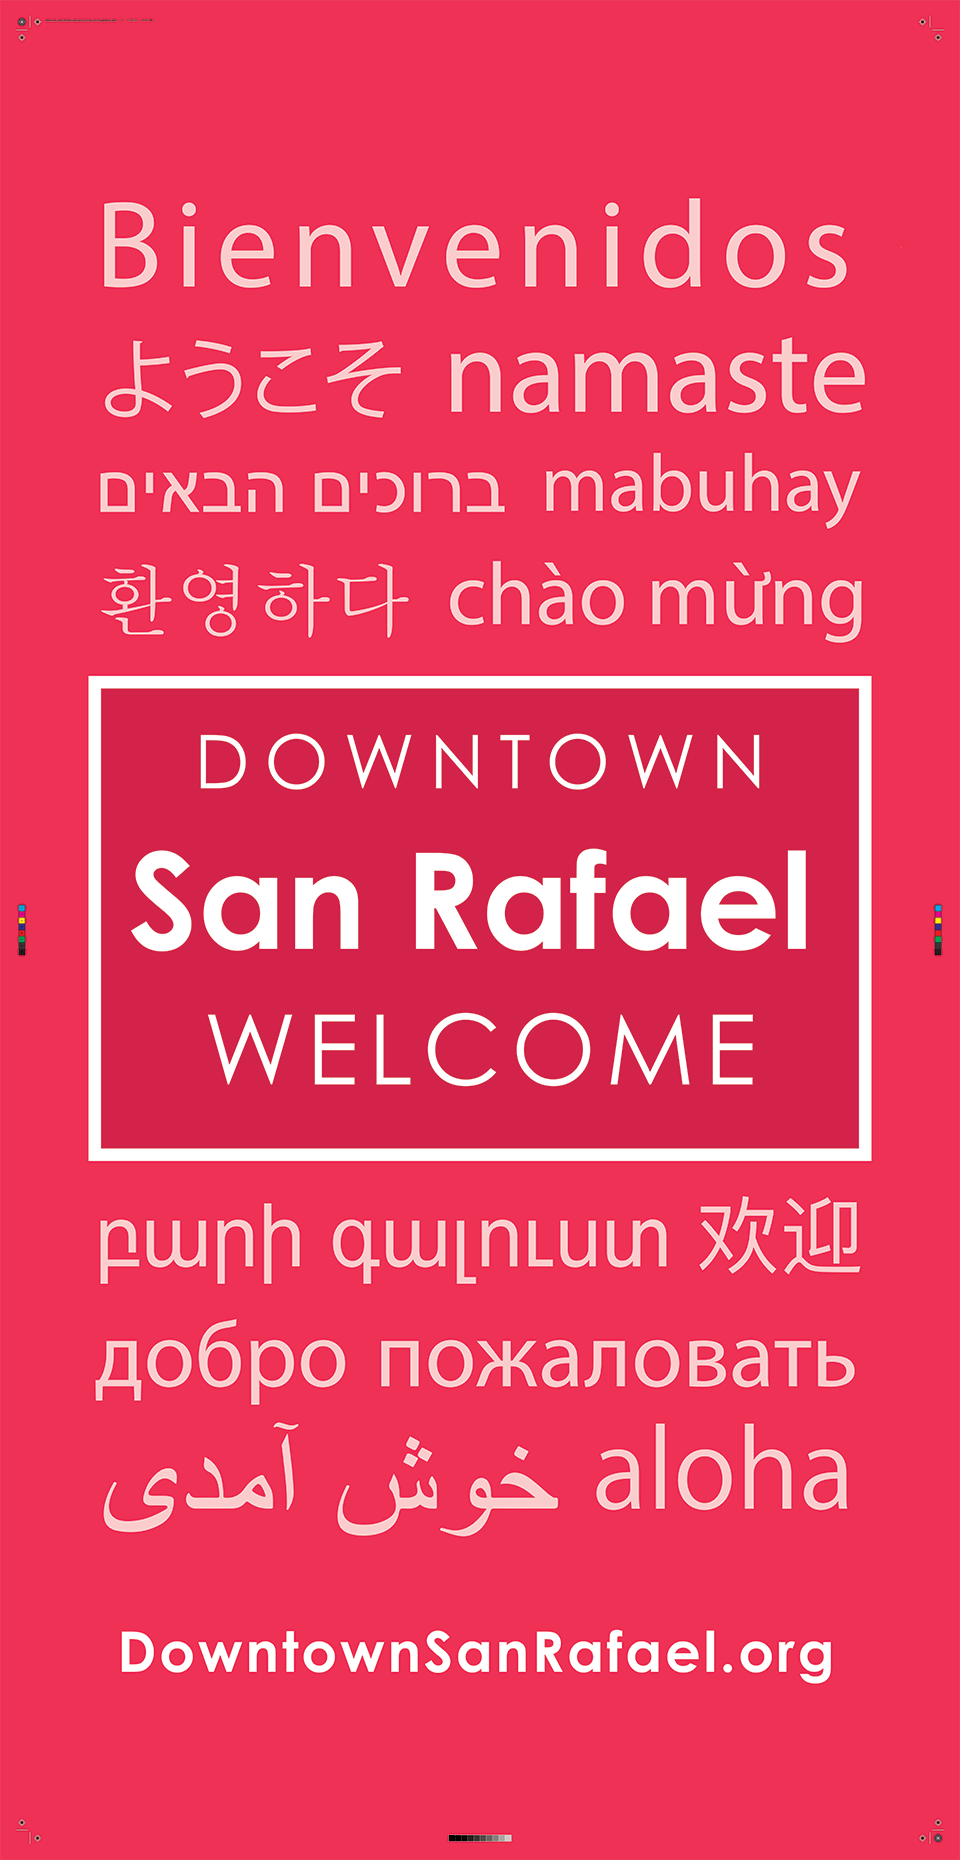 downton-sanrafael-banners-final-with-people-1